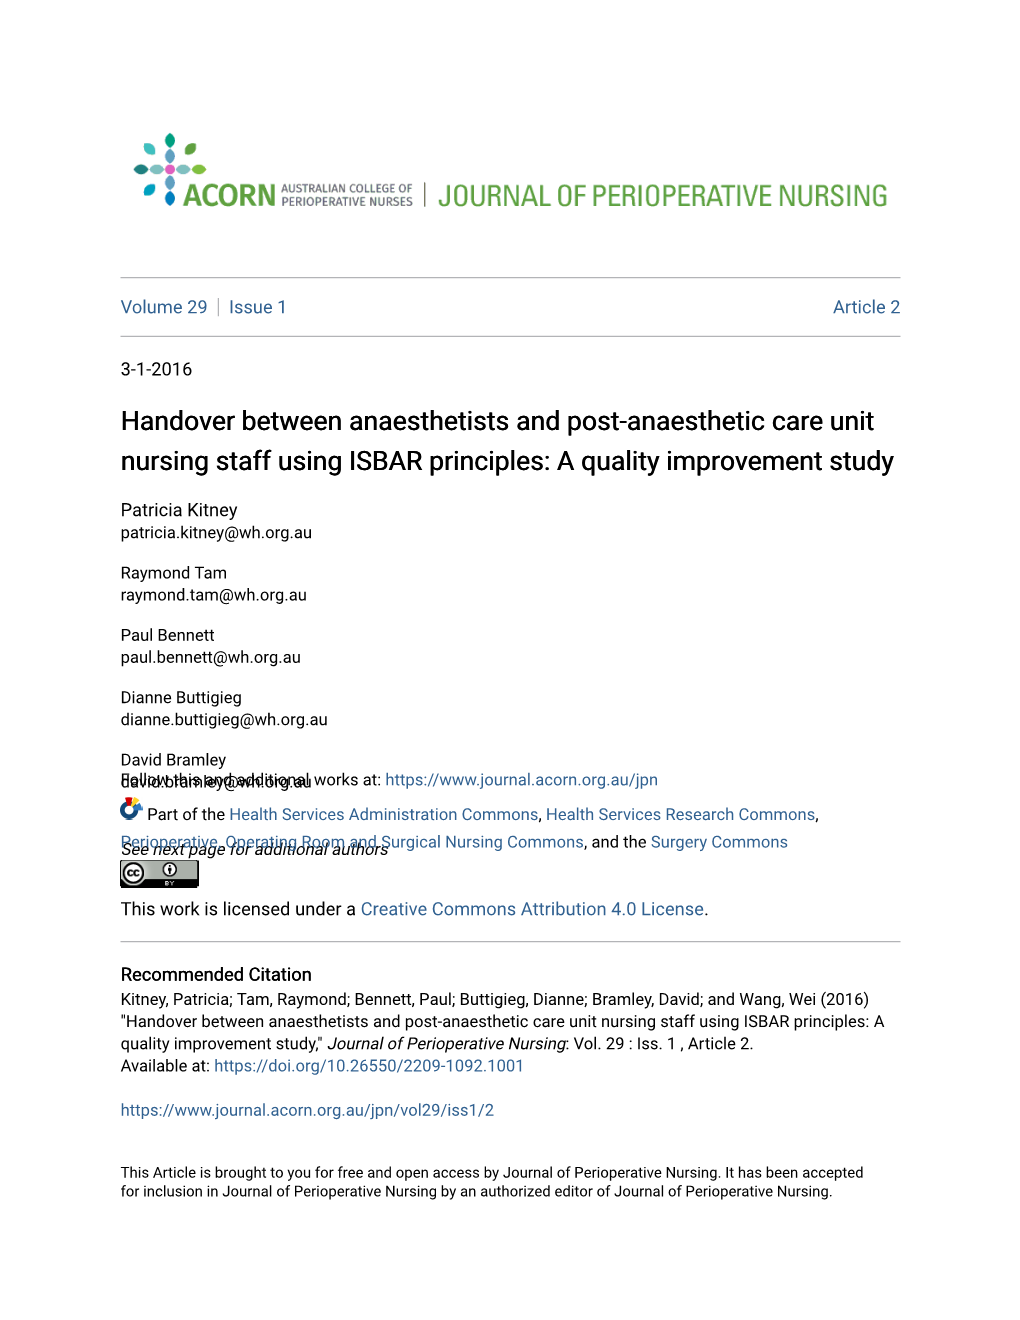 Handover Between Anaesthetists and Post-Anaesthetic Care Unit Nursing Staff Using ISBAR Principles: a Quality Improvement Study